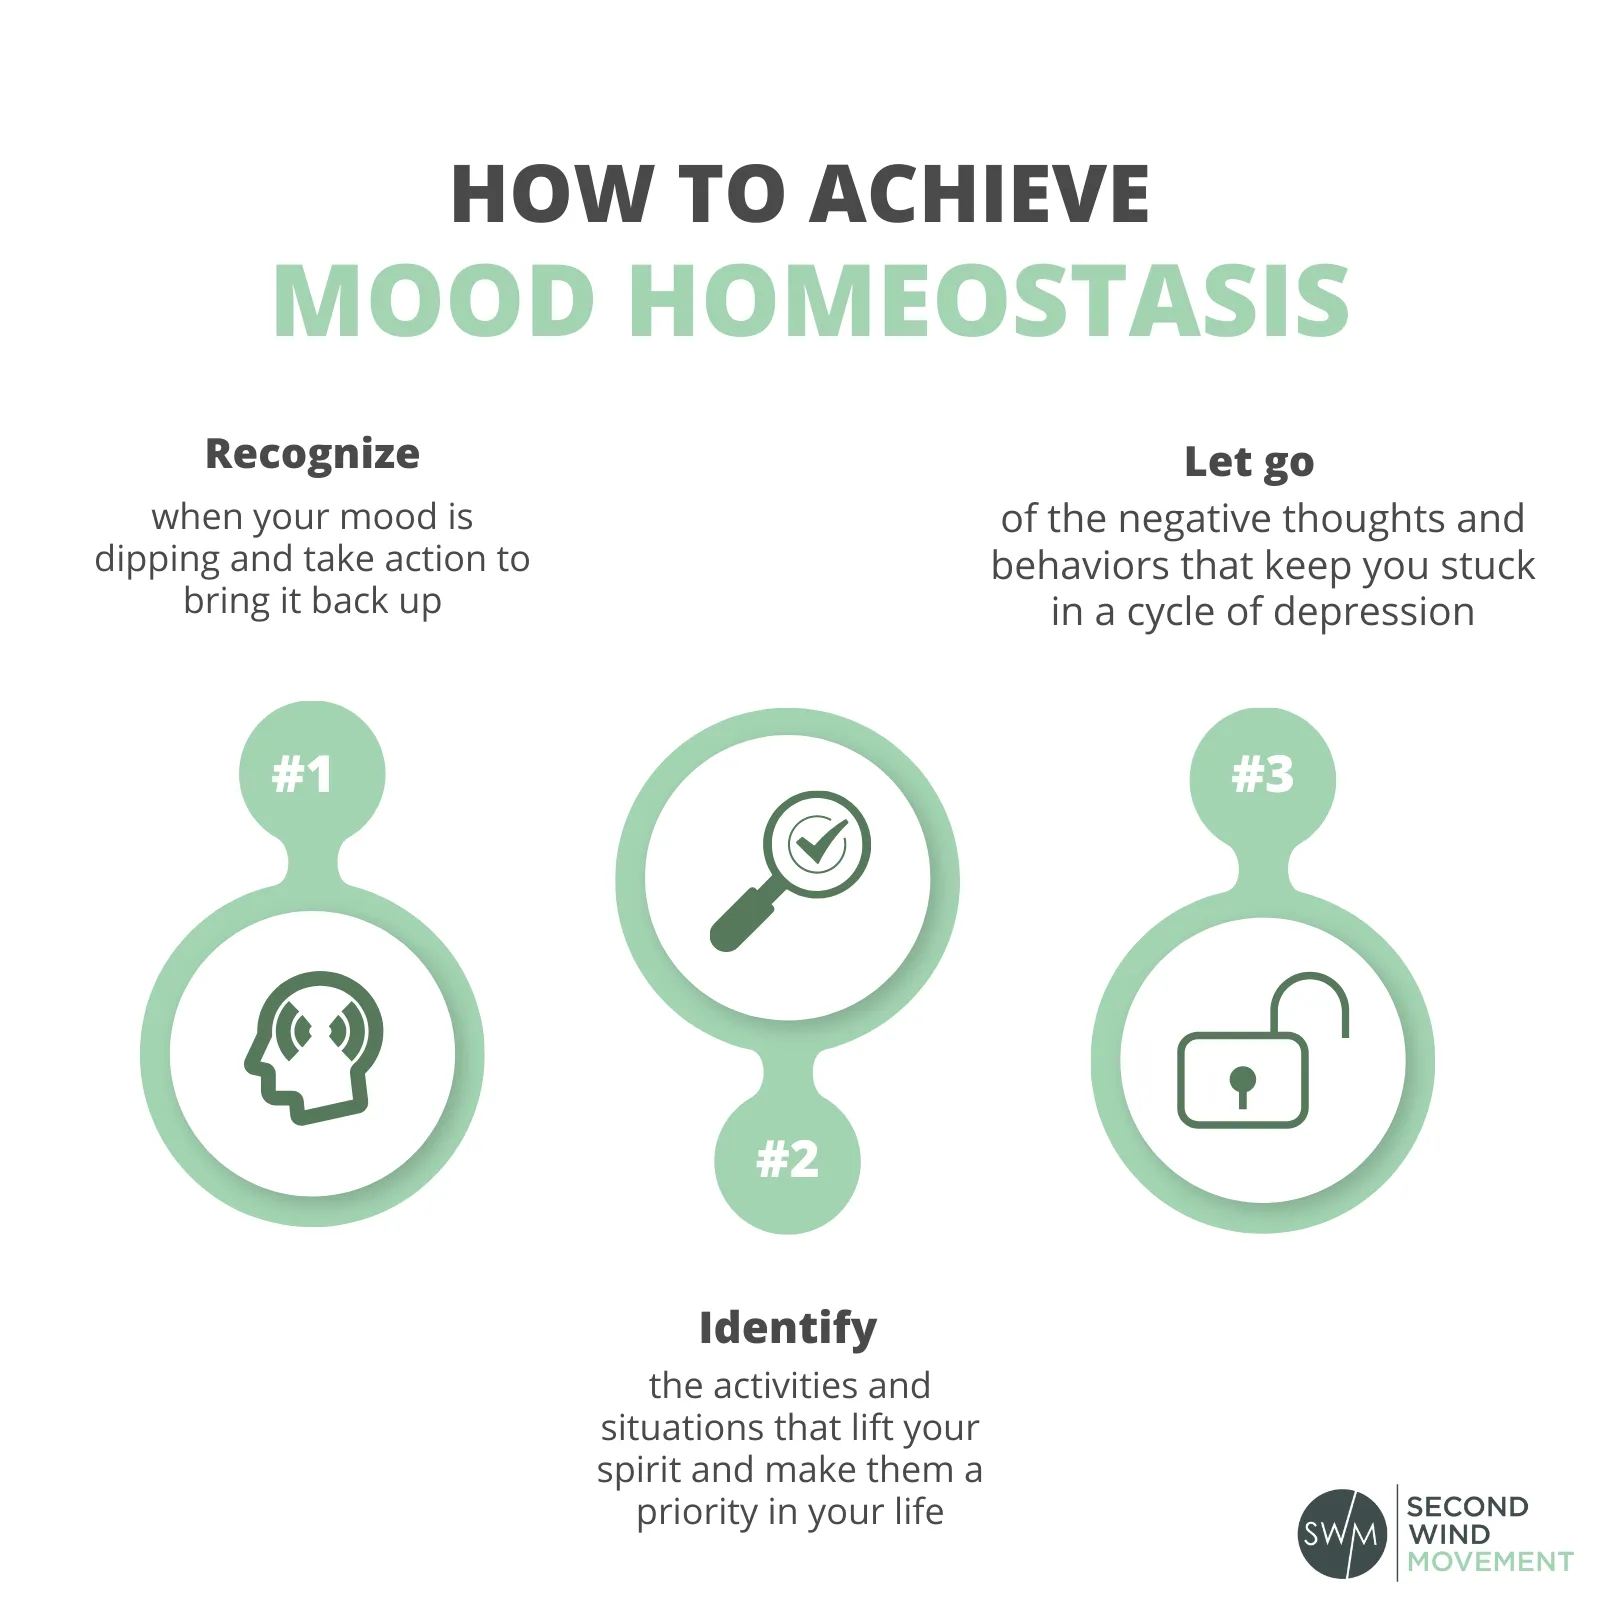 how to achieve mood homeostasis: recognize when your mood is dipping and take action to bring it back up, Recognize the activities and situations that lift your spirit and make them a priority in your life, and let go of the negative thoughts and behaviors that keep you stuck in a cycle of retirement depression